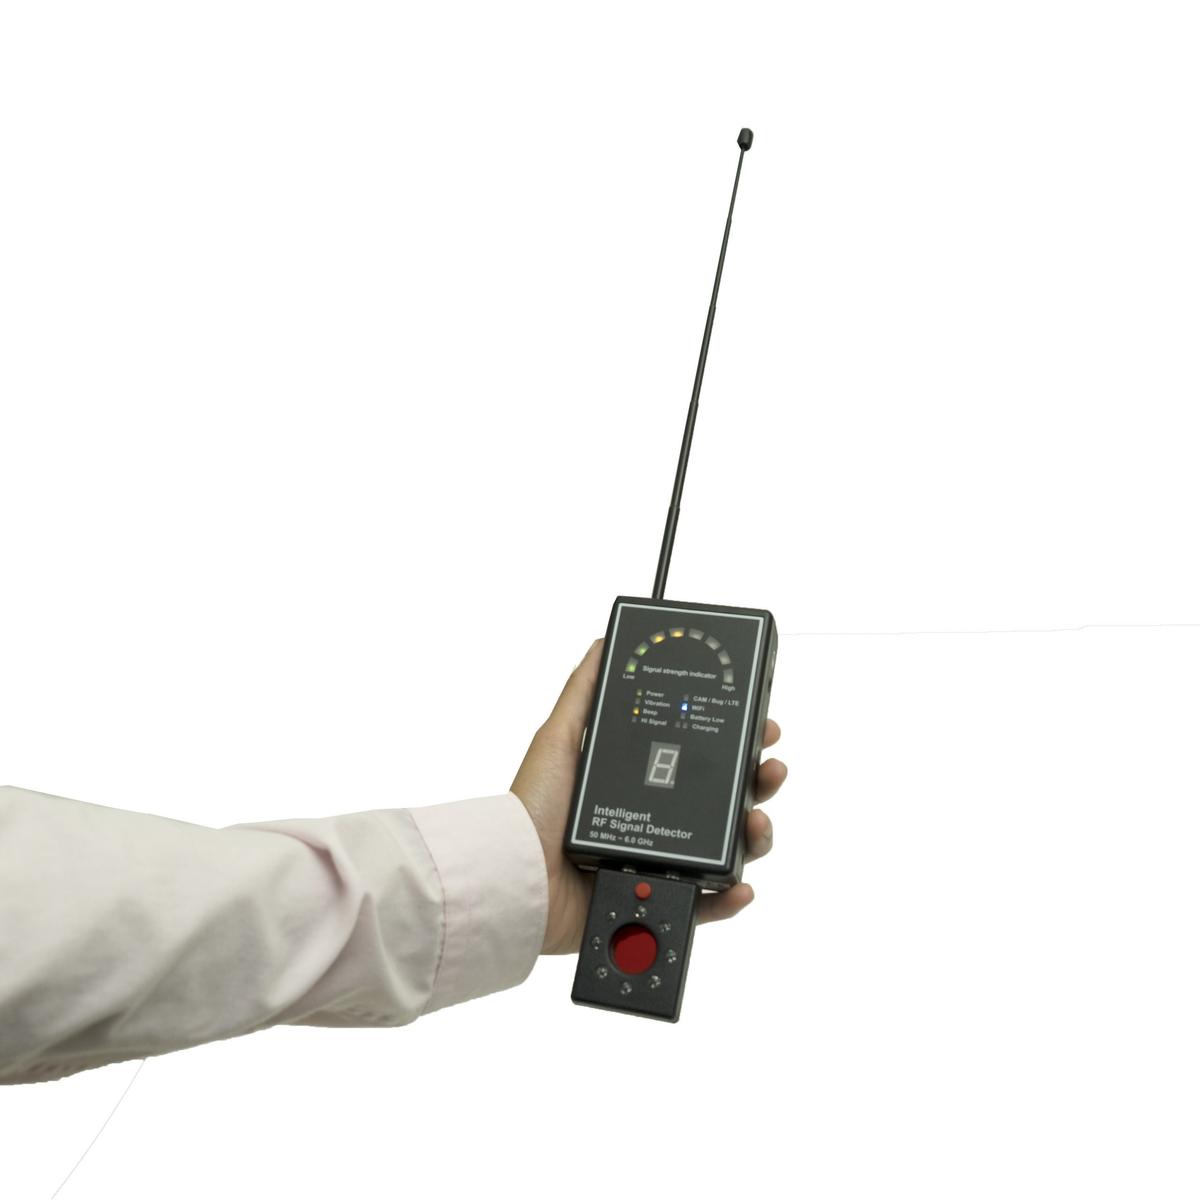 Not all "bugs" are insects. A radio frequency scanner can detect hidden listening devices. (Courtesy of Minigadgets, Inc.)